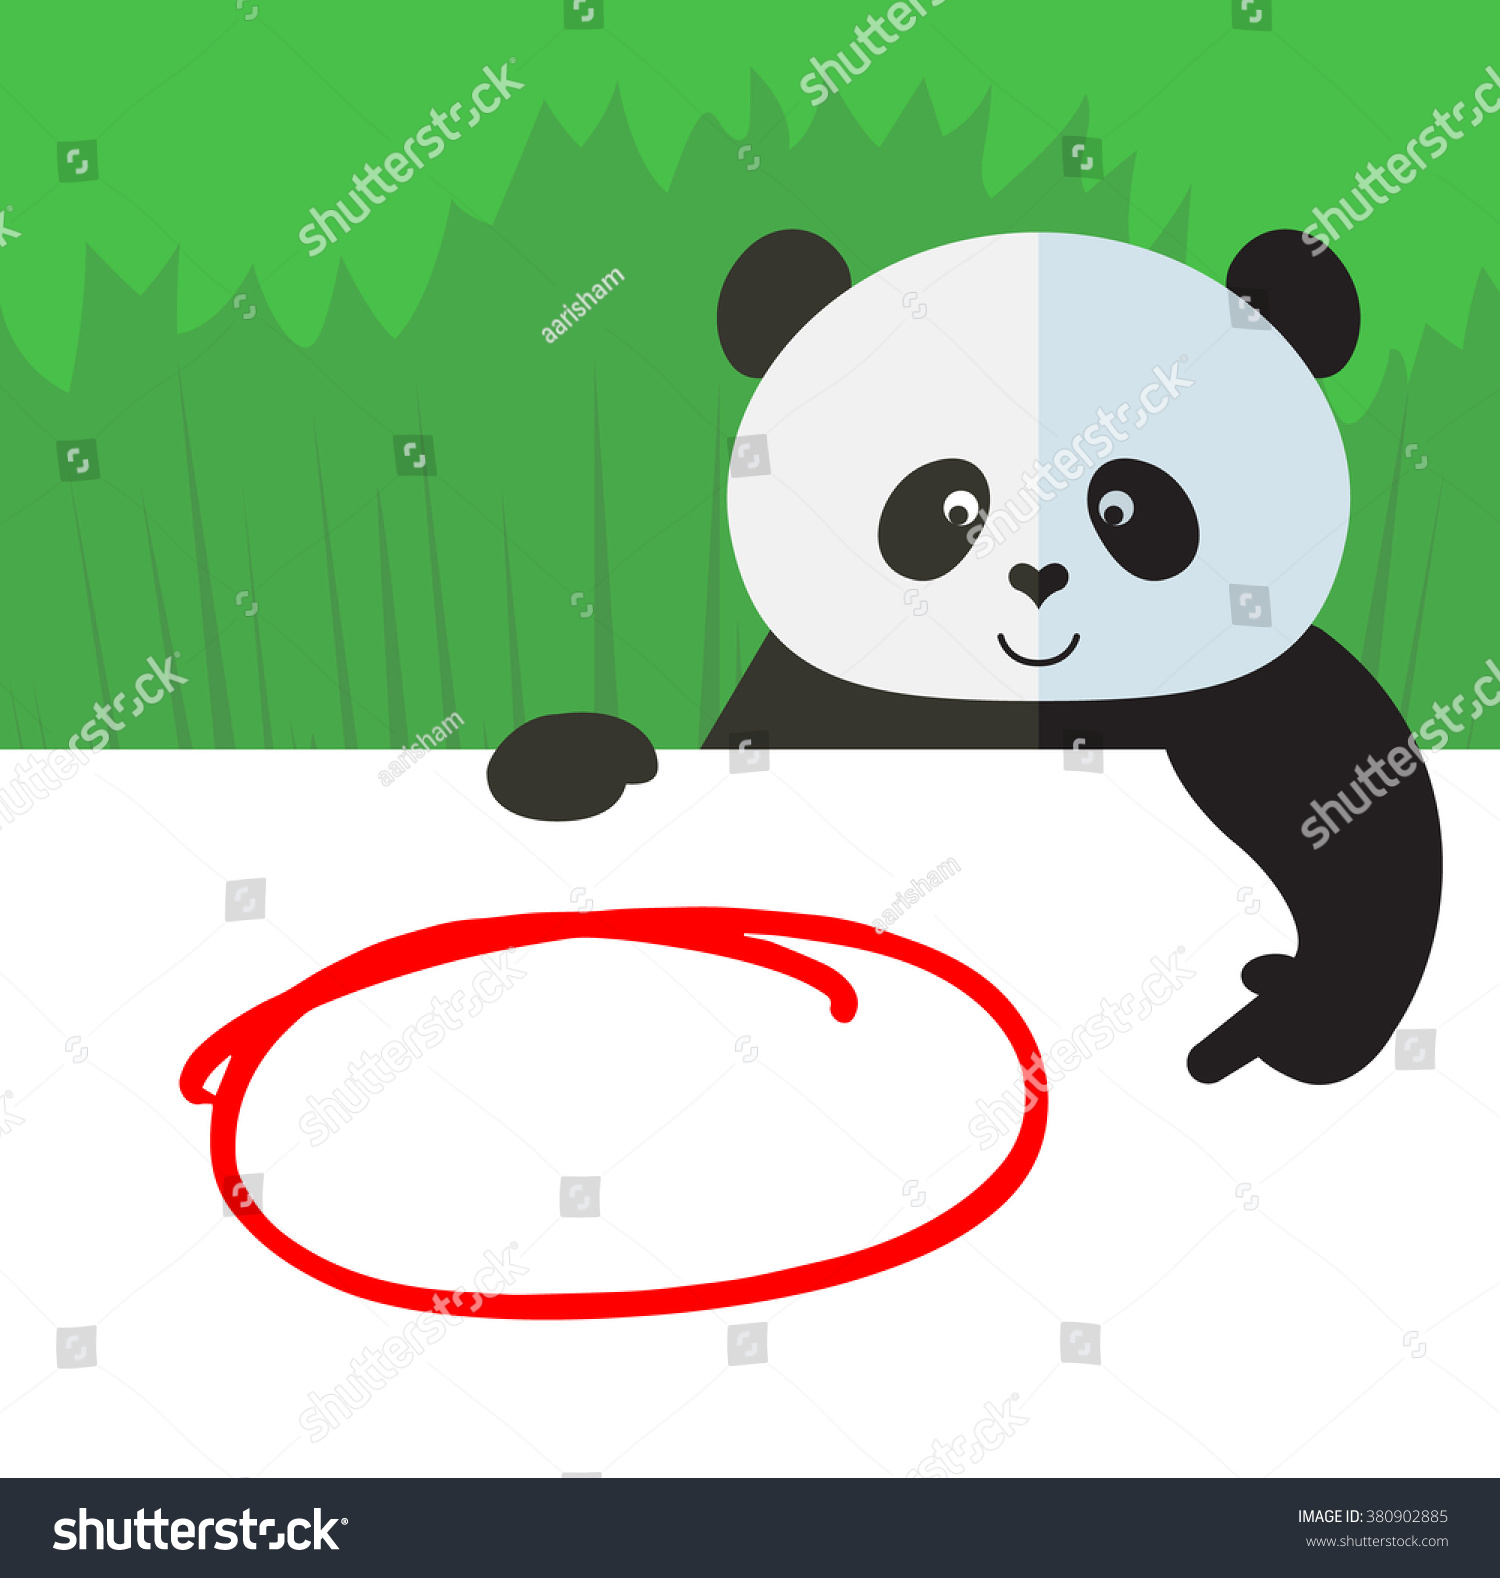 SVG of Panda holding a blank sheet and pointing on red empty frame. Flat style vector illustration on Green background. National emblem of China svg